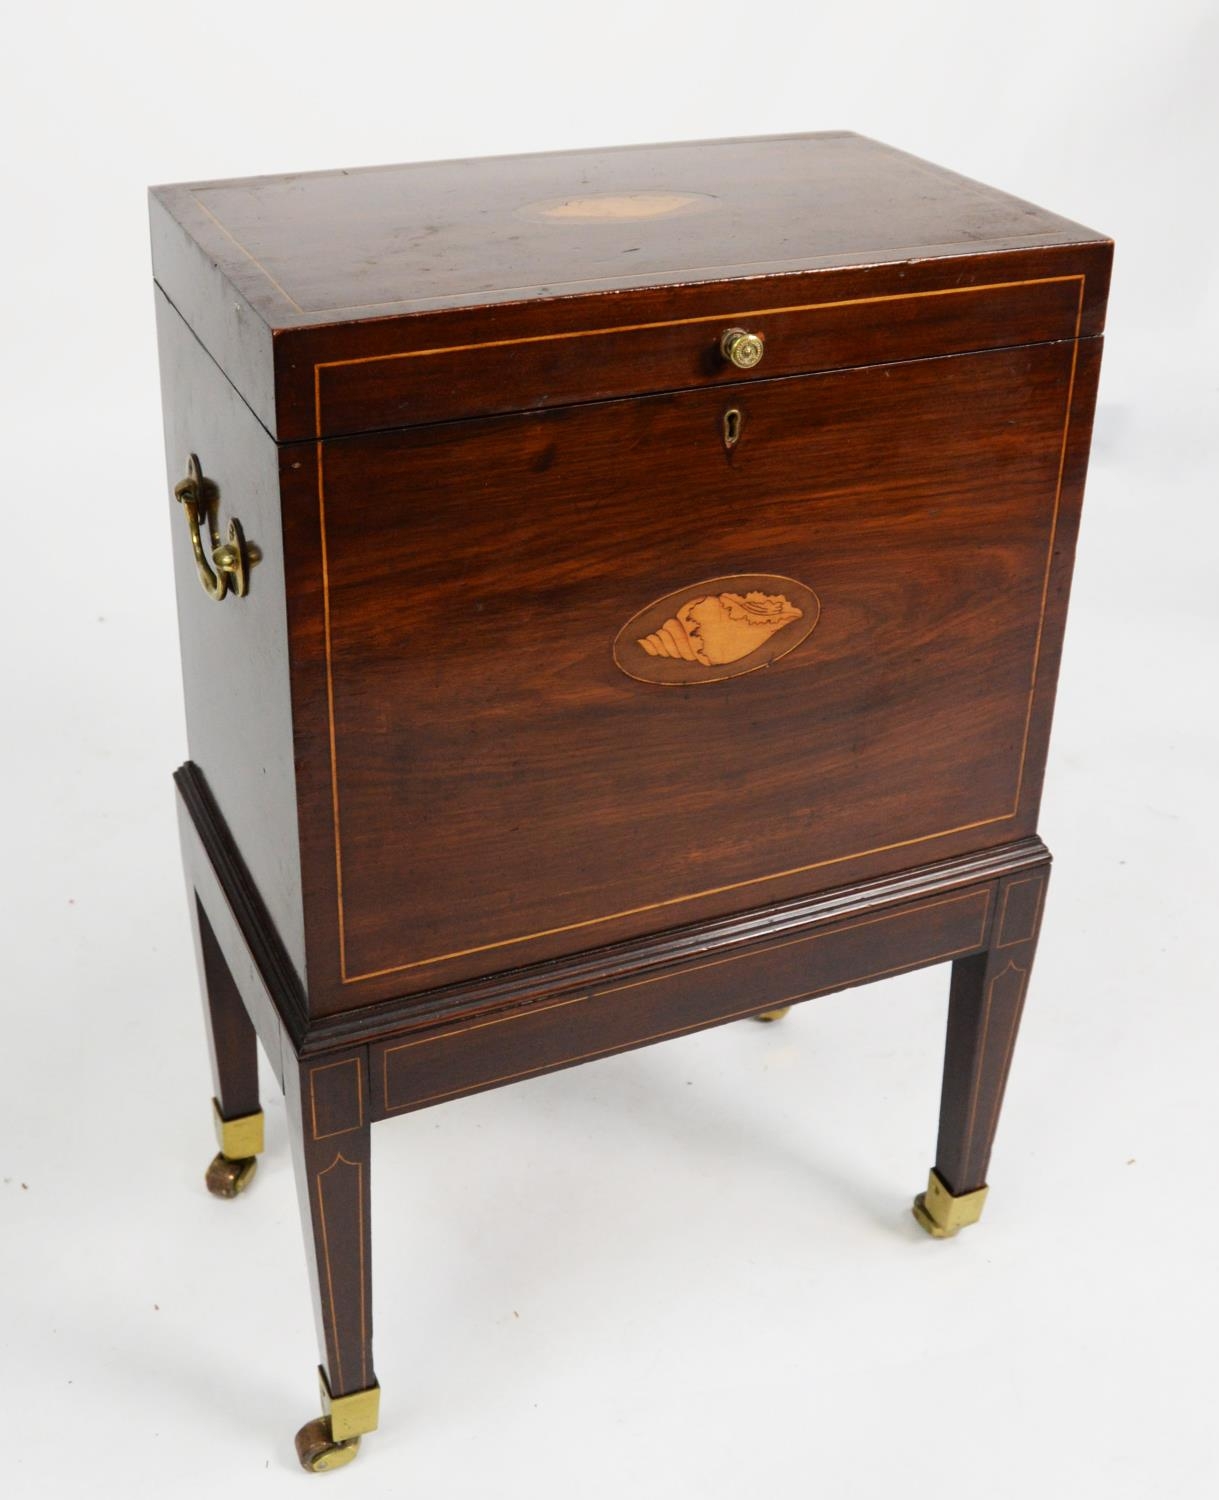 GEORGE III INLAID MAHOGANY CELLARETTE, the oblong top with oval shell inlay, set above a matching - Image 2 of 6